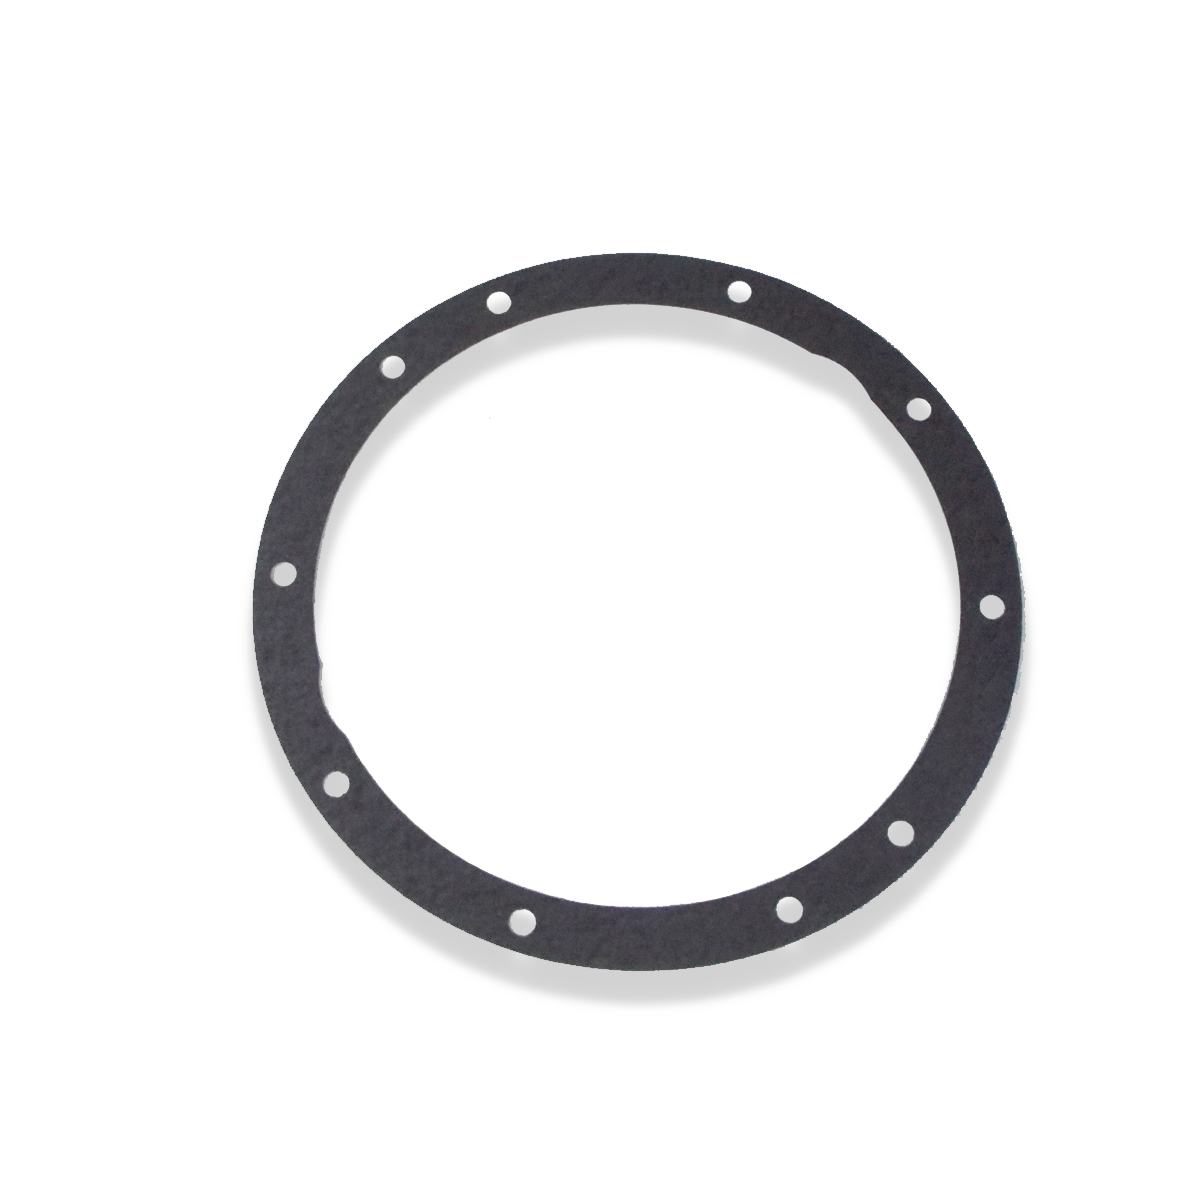 1946-1972 Differential Housing Cover Gasket 3/4 Ton and 1 Ton Chevrolet and GMC Pickup Truck